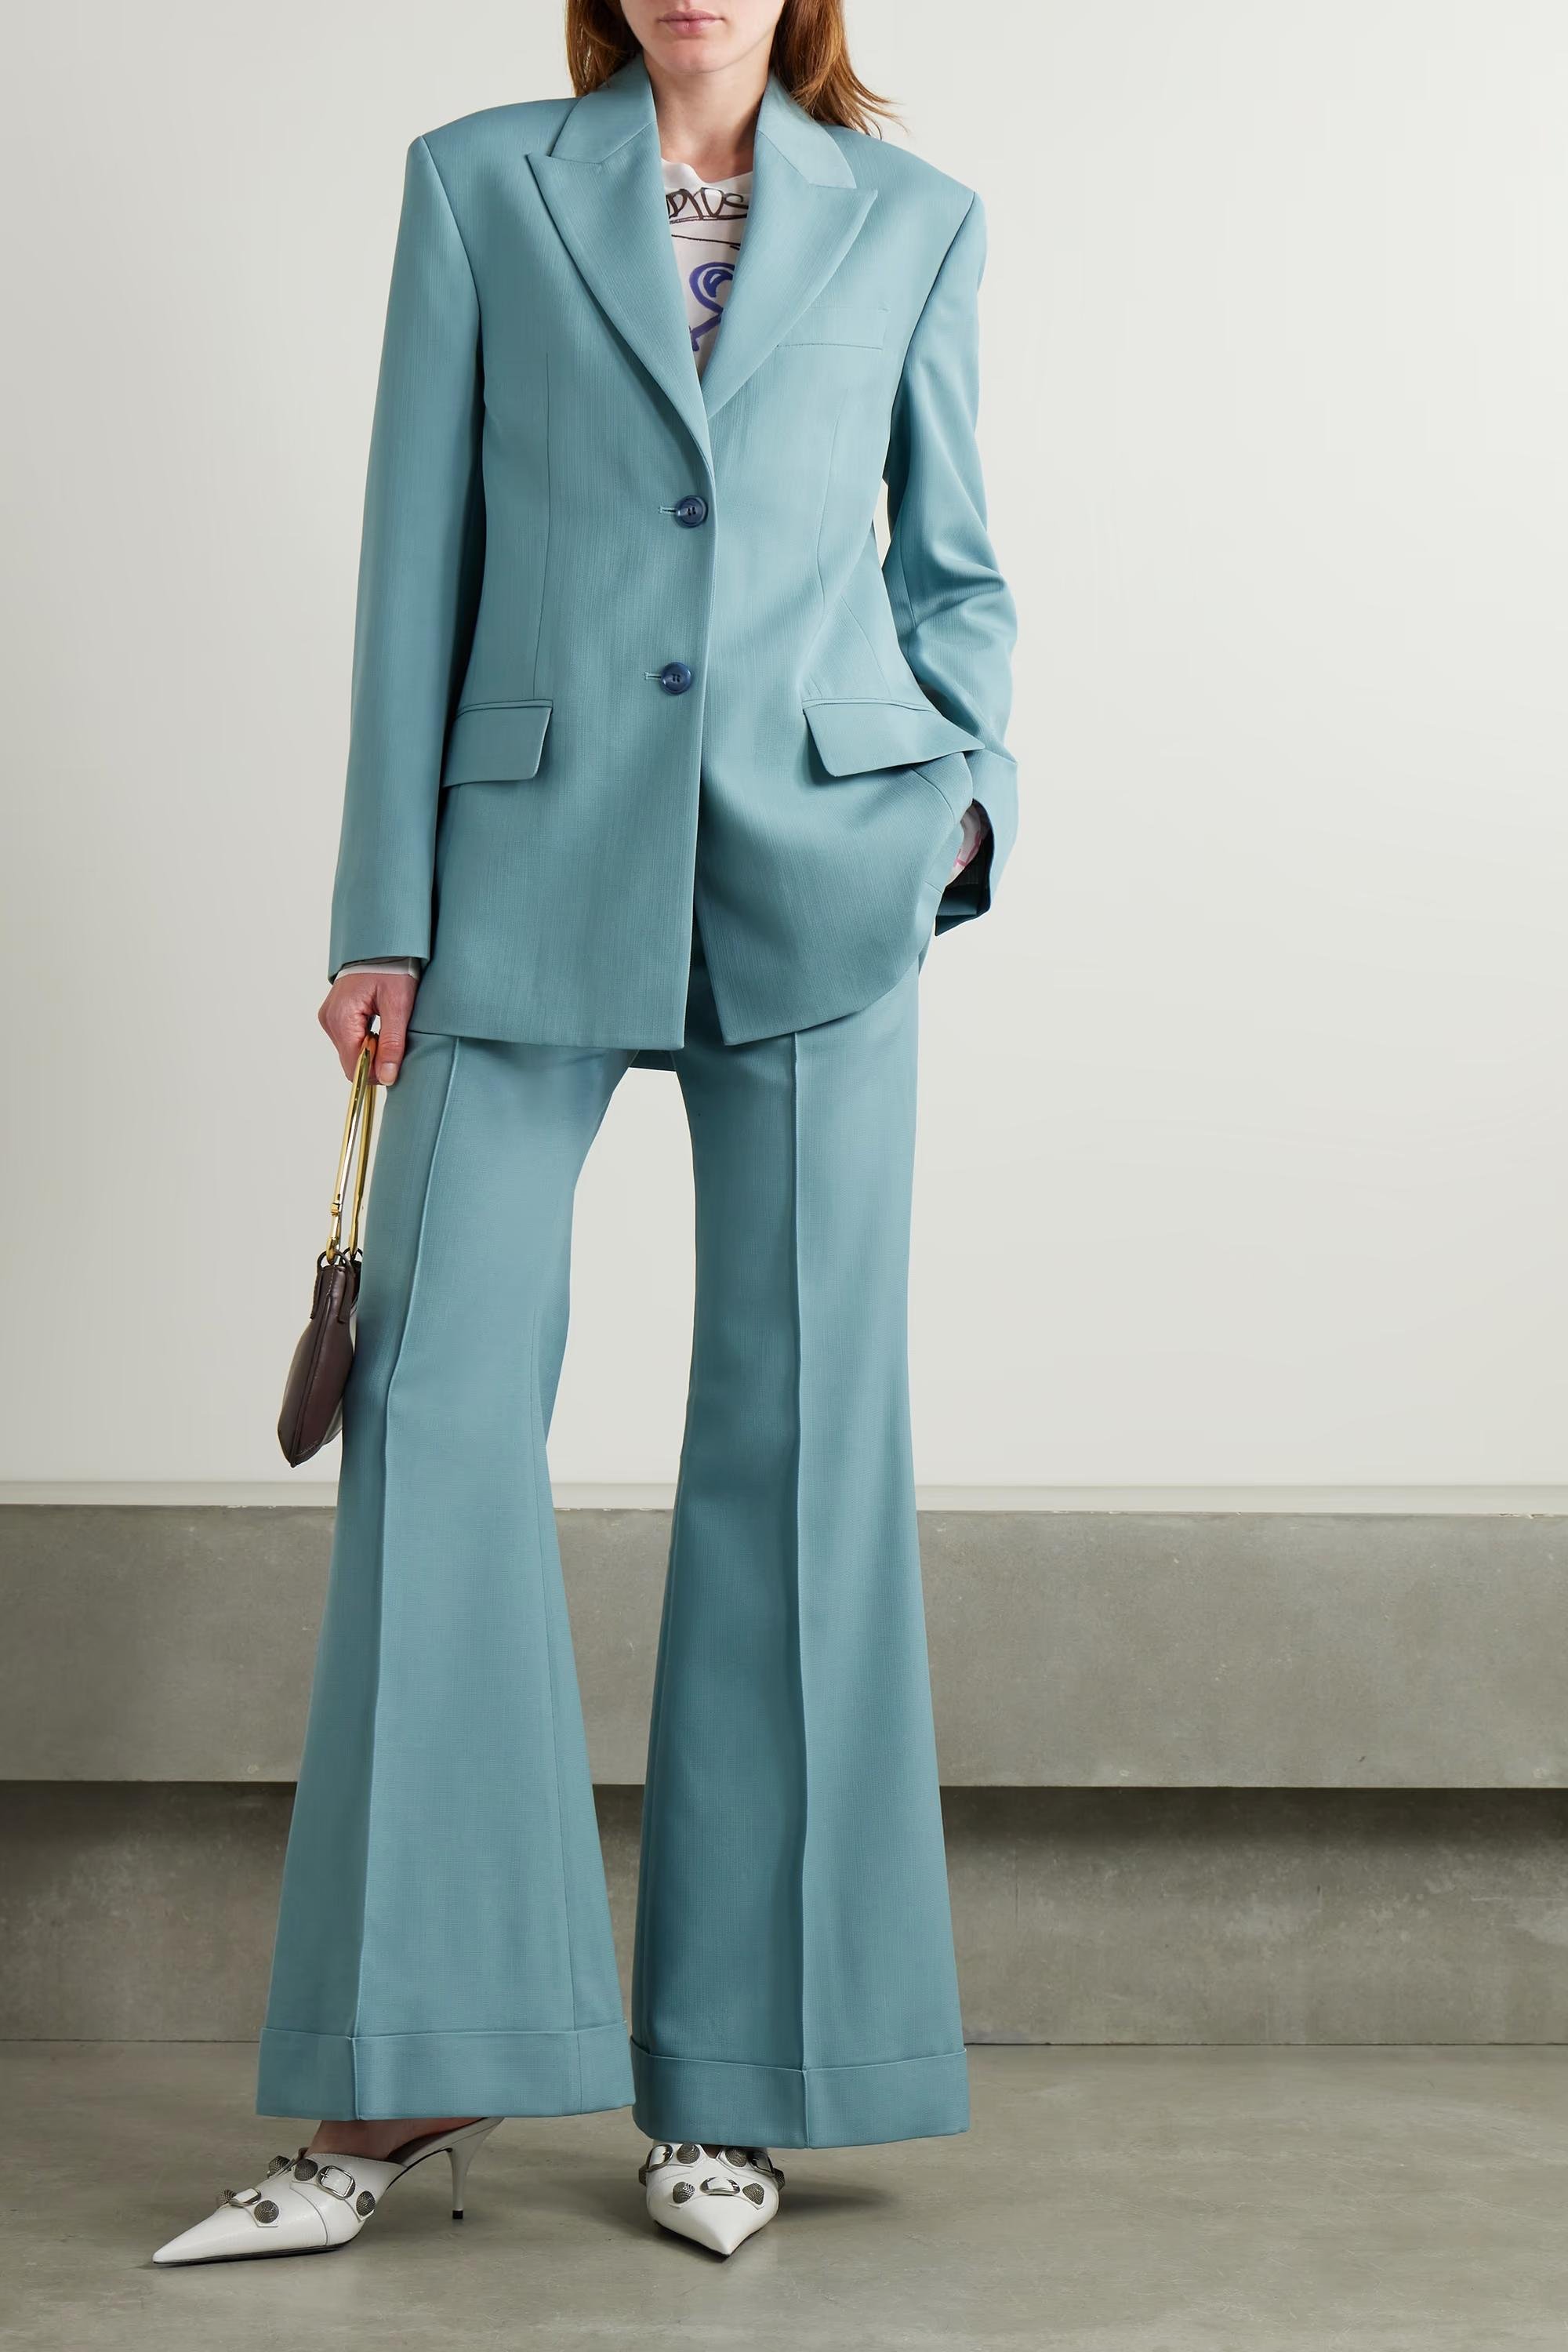 Blue suit from sustainable brand Stella McCartney